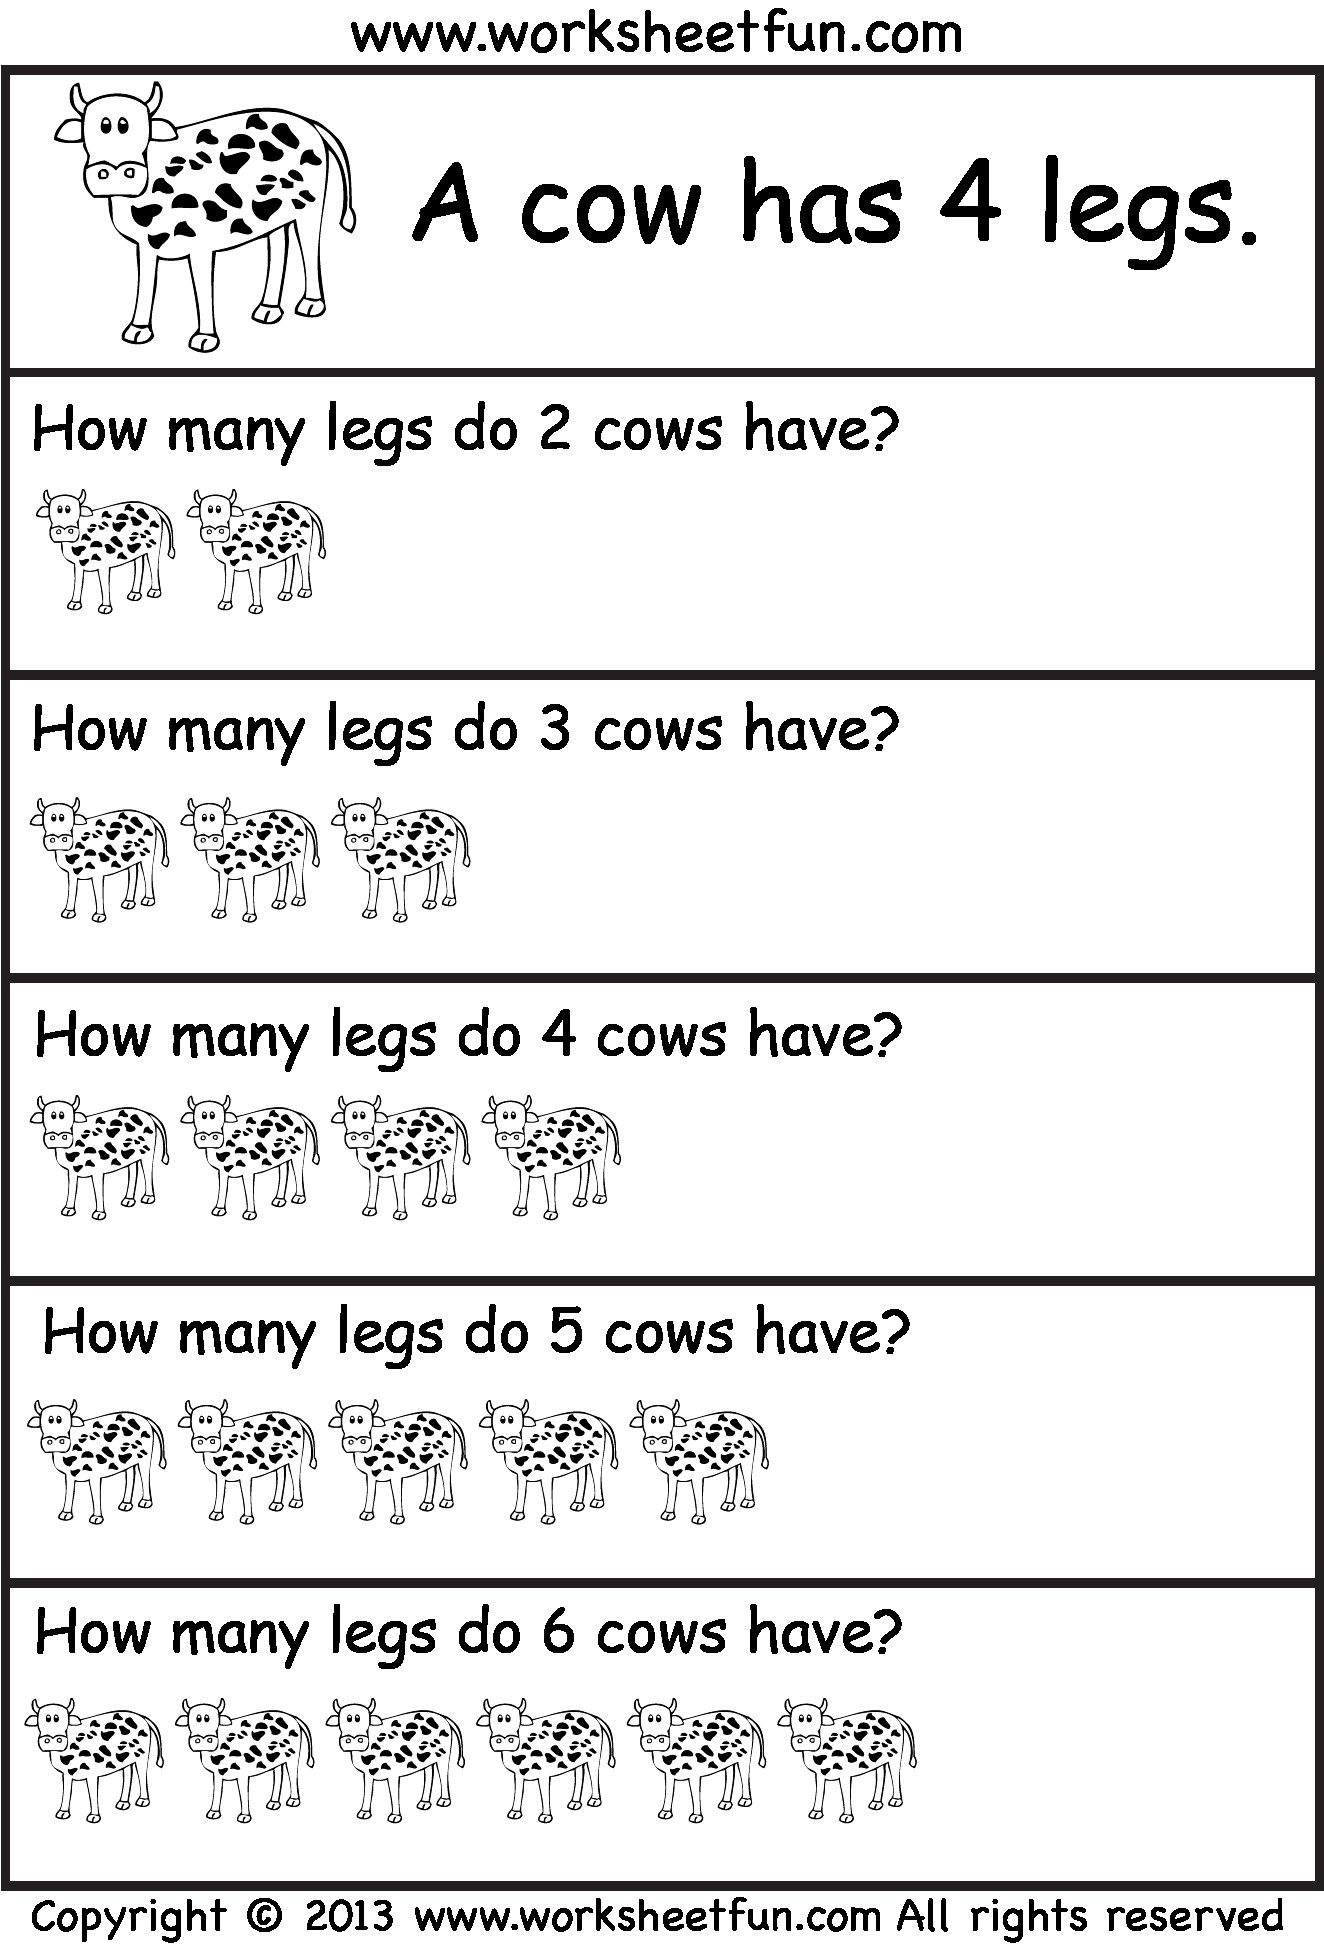 Free Math Worksheets Third Grade 3 Division Division Facts Missing Number 1 10